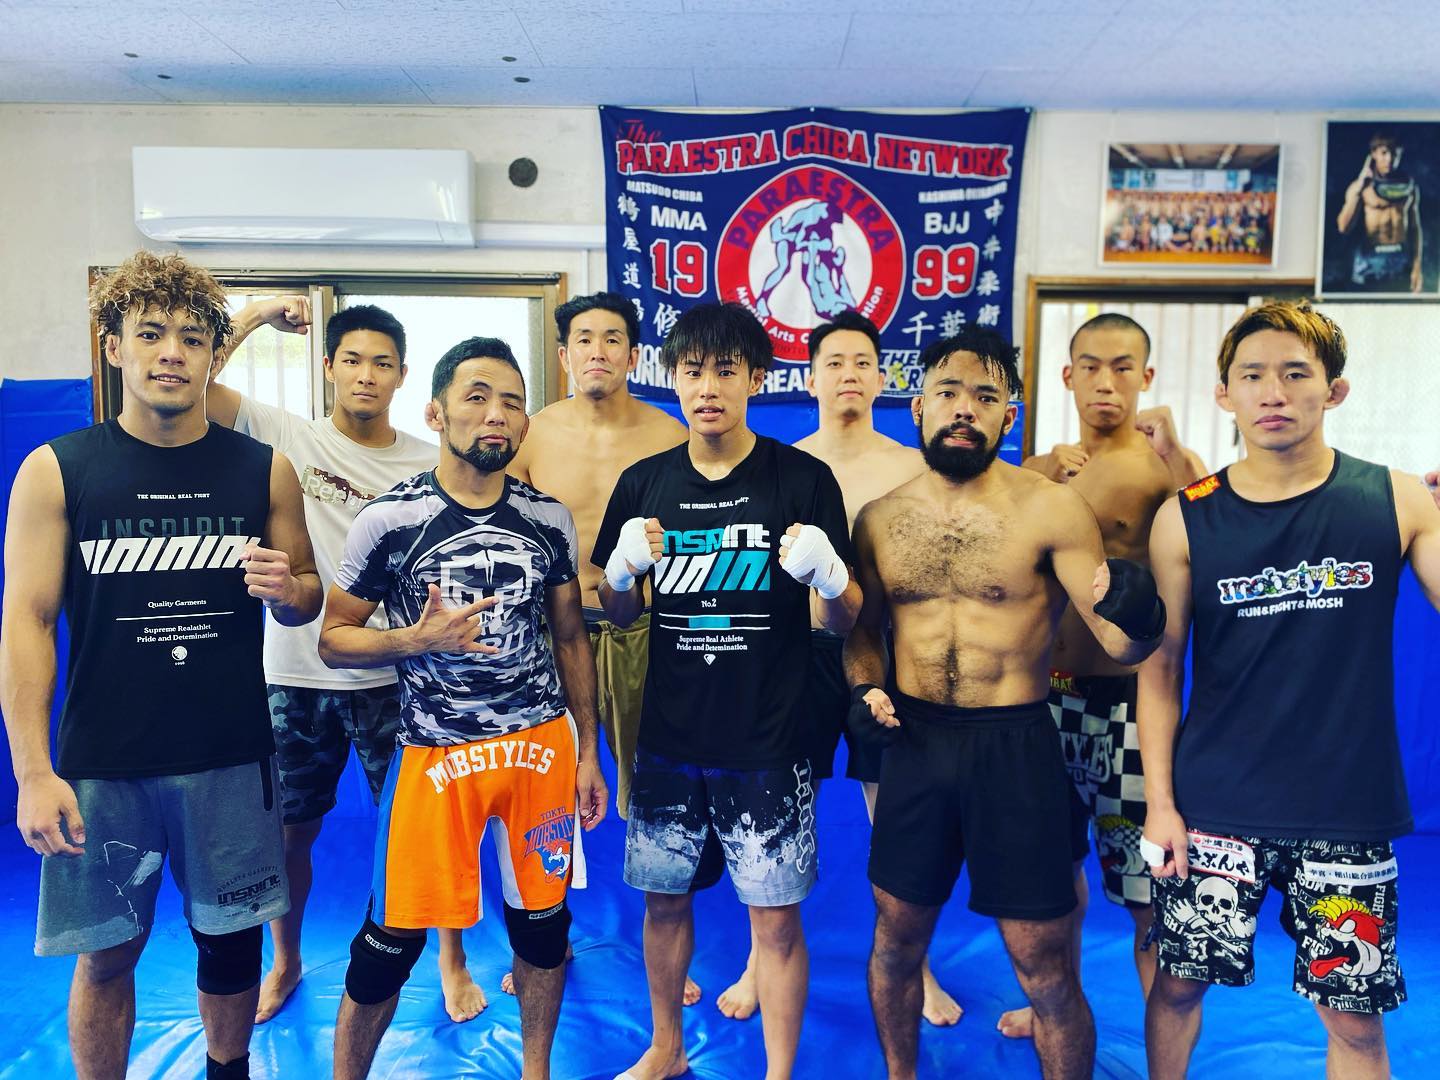 The Paraestra Okinawa Pro TrainingThey build their minds and bodies for the next battle.  Okinawa pro shooters, they are always in perfect condition.#パラエストラ #沖縄 #那覇 #与儀 #MMA #shooto #コザ #総合格闘技 #修斗 #キックボクシング #柔術 #jiujitsu #ダイエット